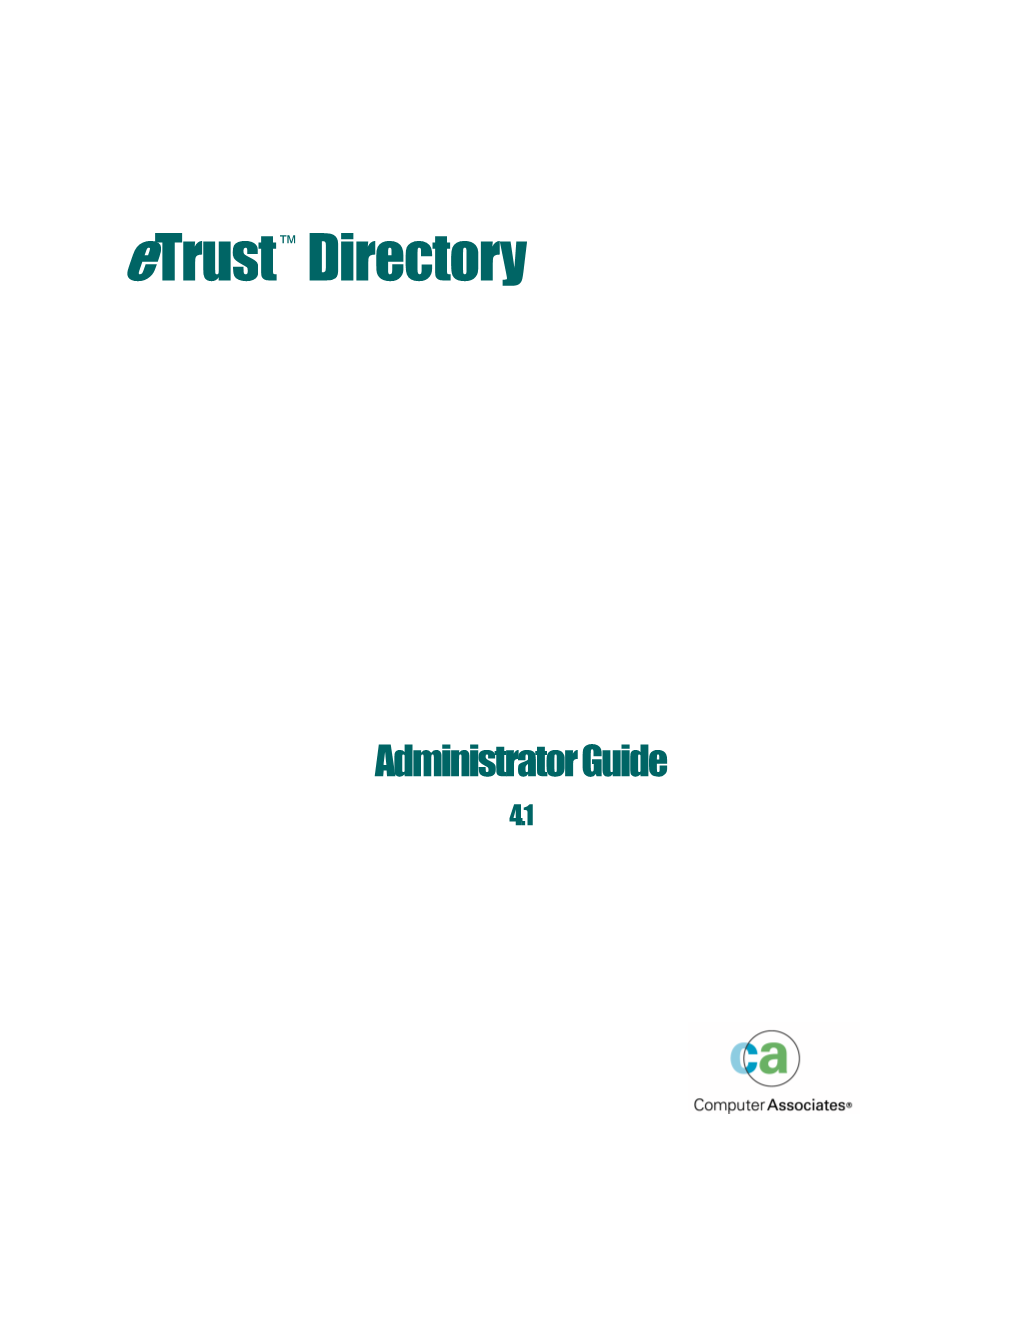 Etrust Directory Administrator Guide